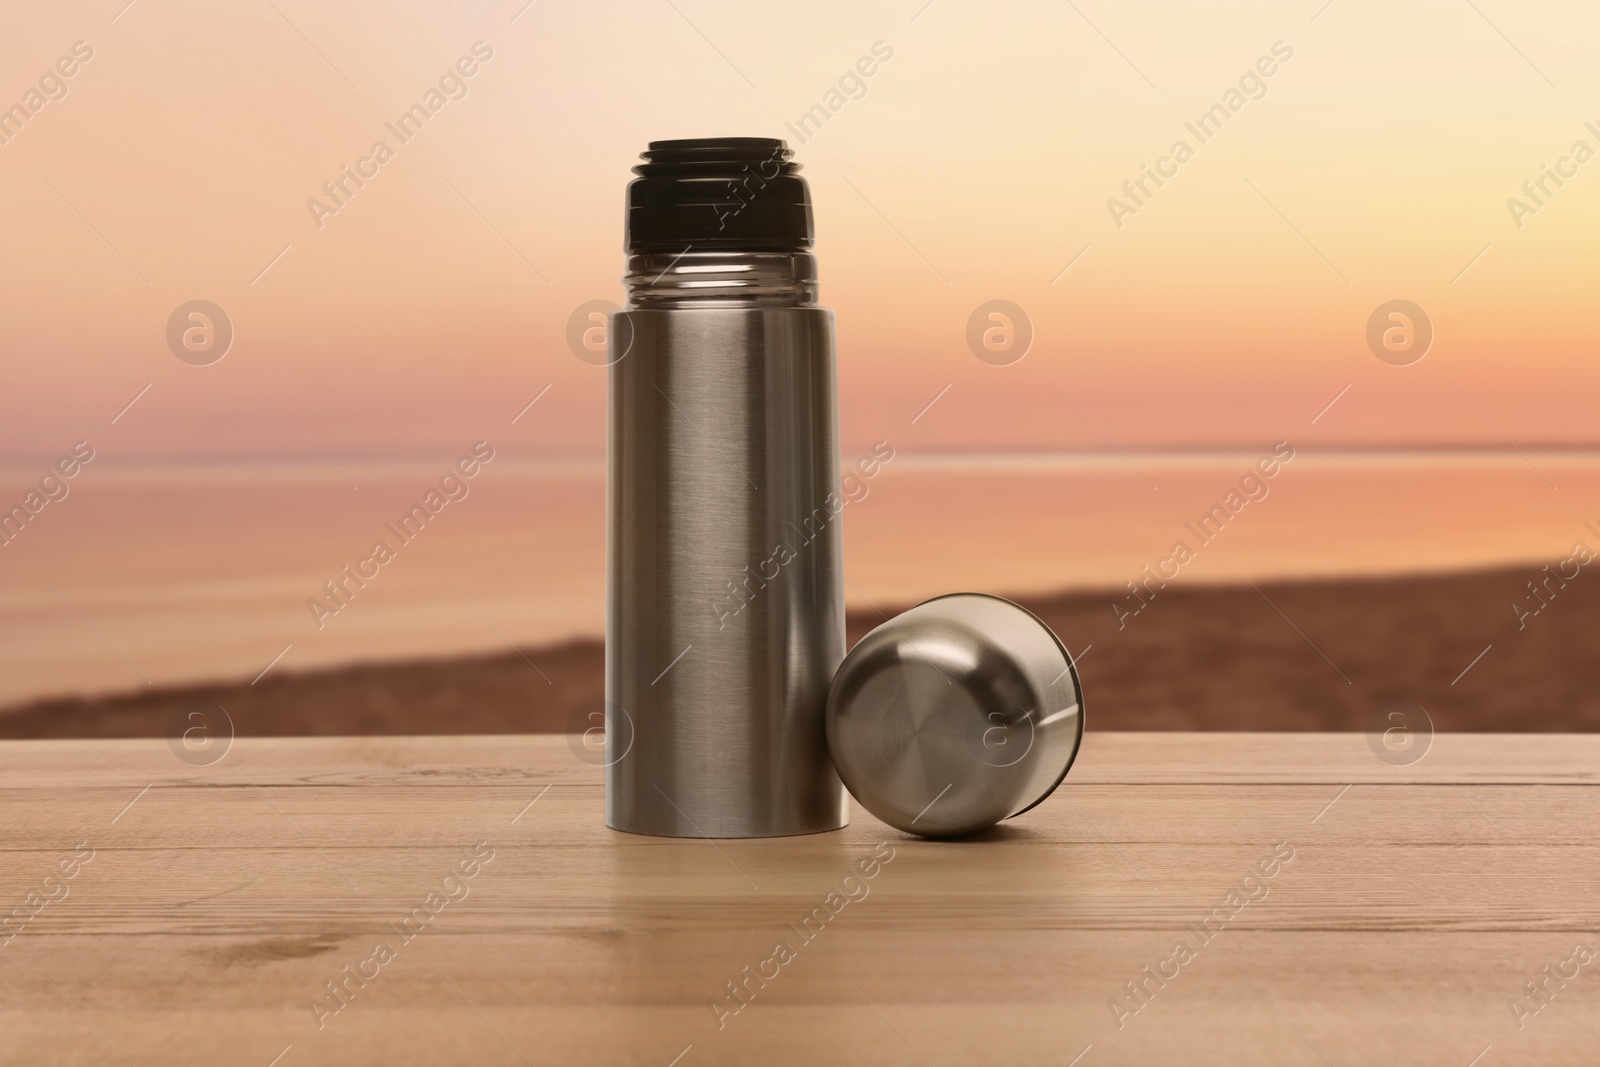 Image of Thermo bottles on wooden table near sea under sunset sky